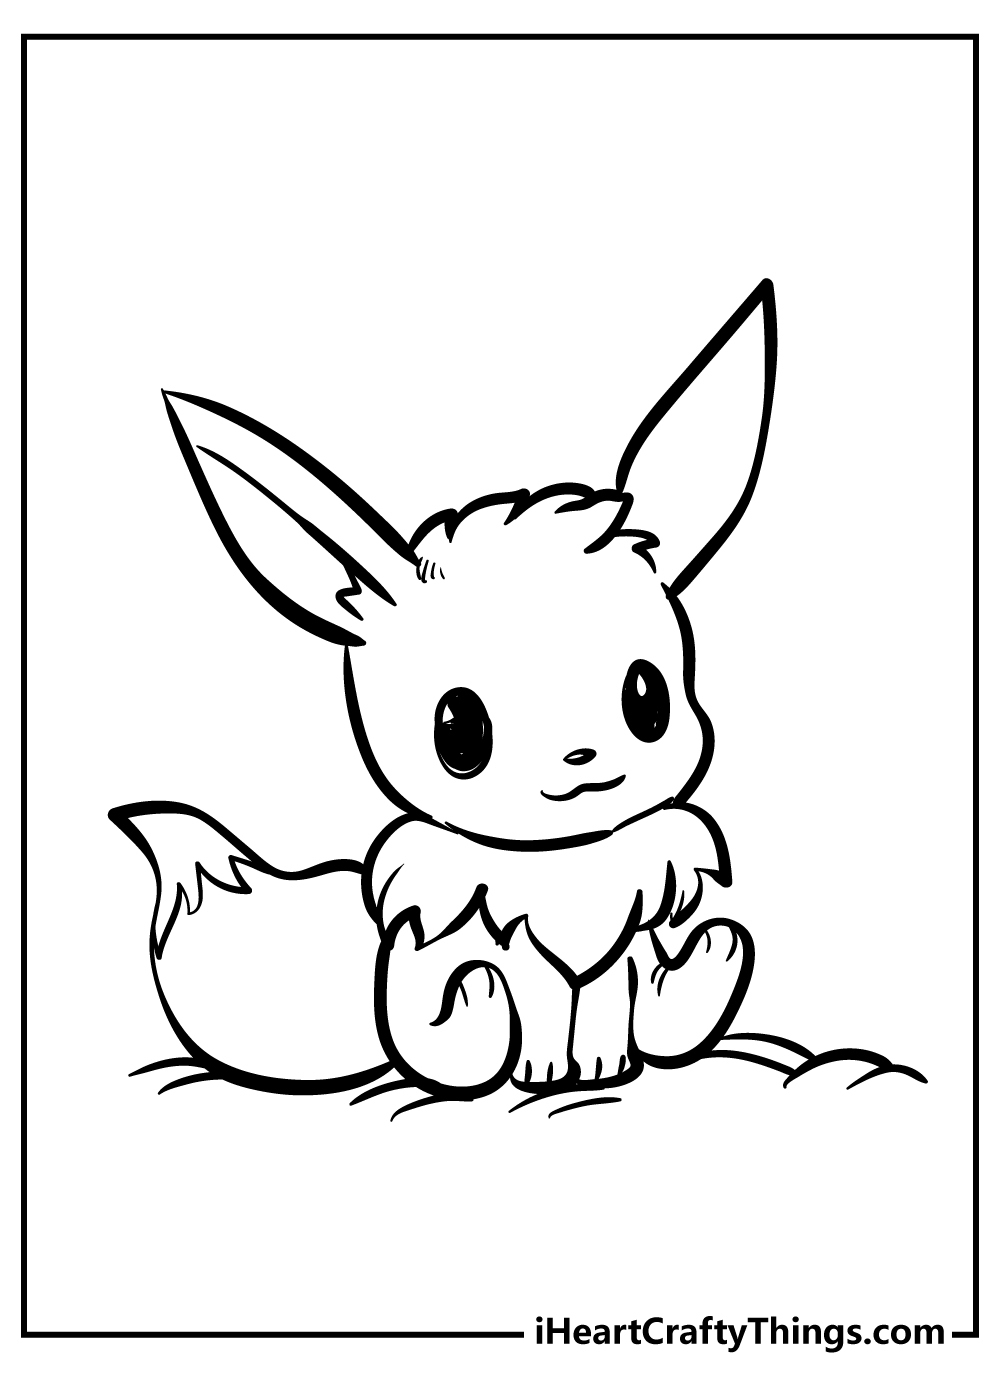 Eevee pokemon coloring pages free printables